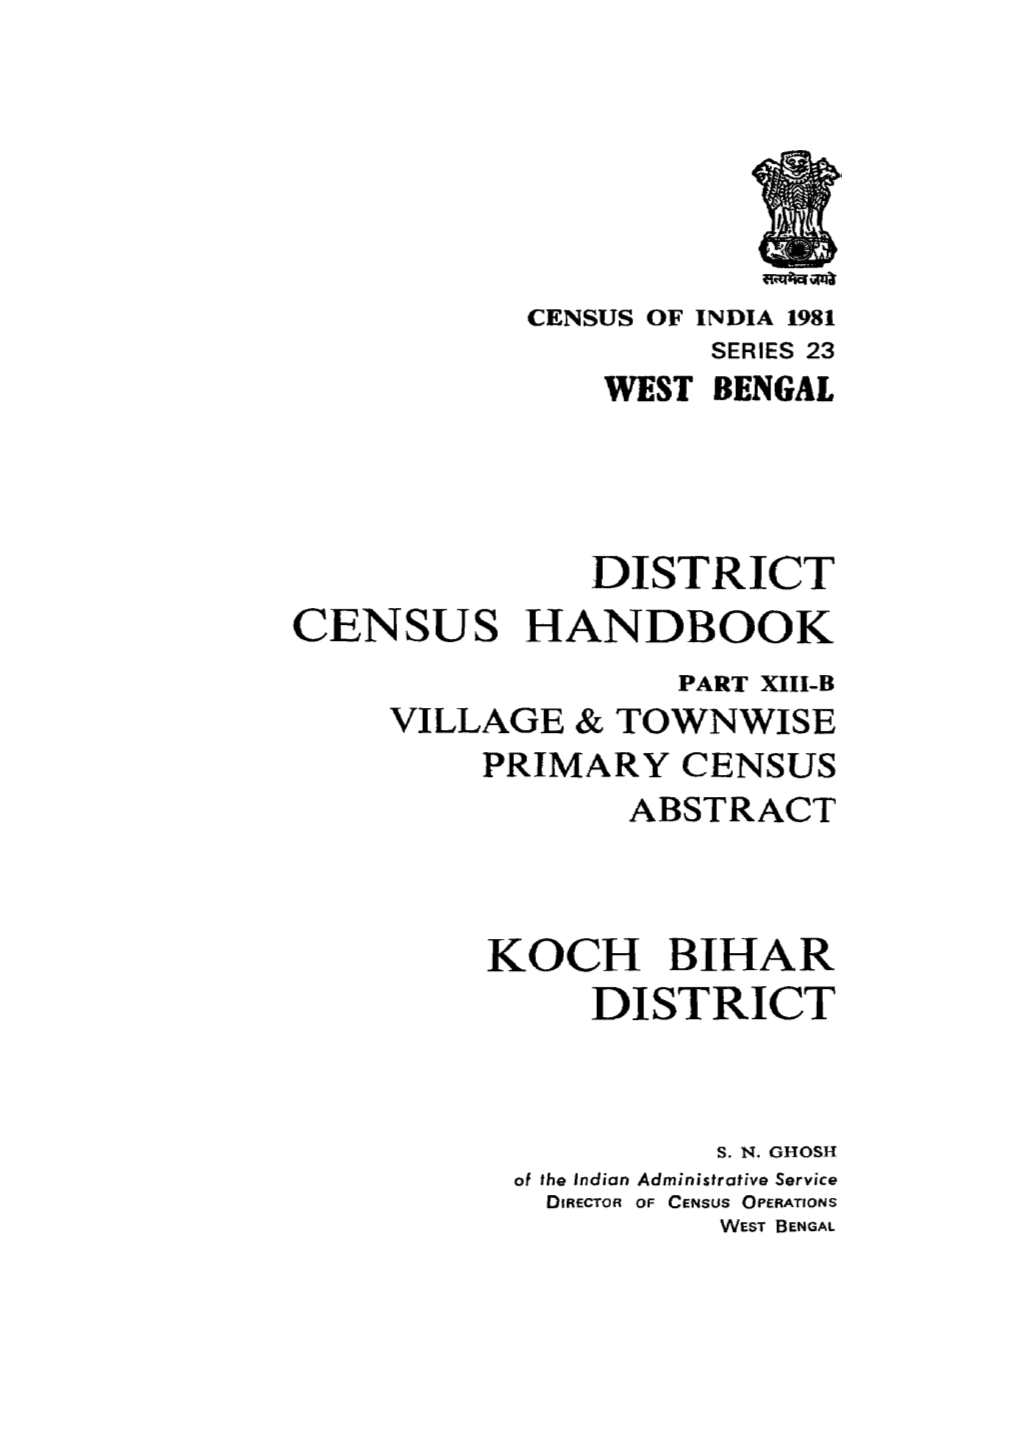 Village & Townwise Primary Census Abstract, Koch Bihar, Part XIII-B